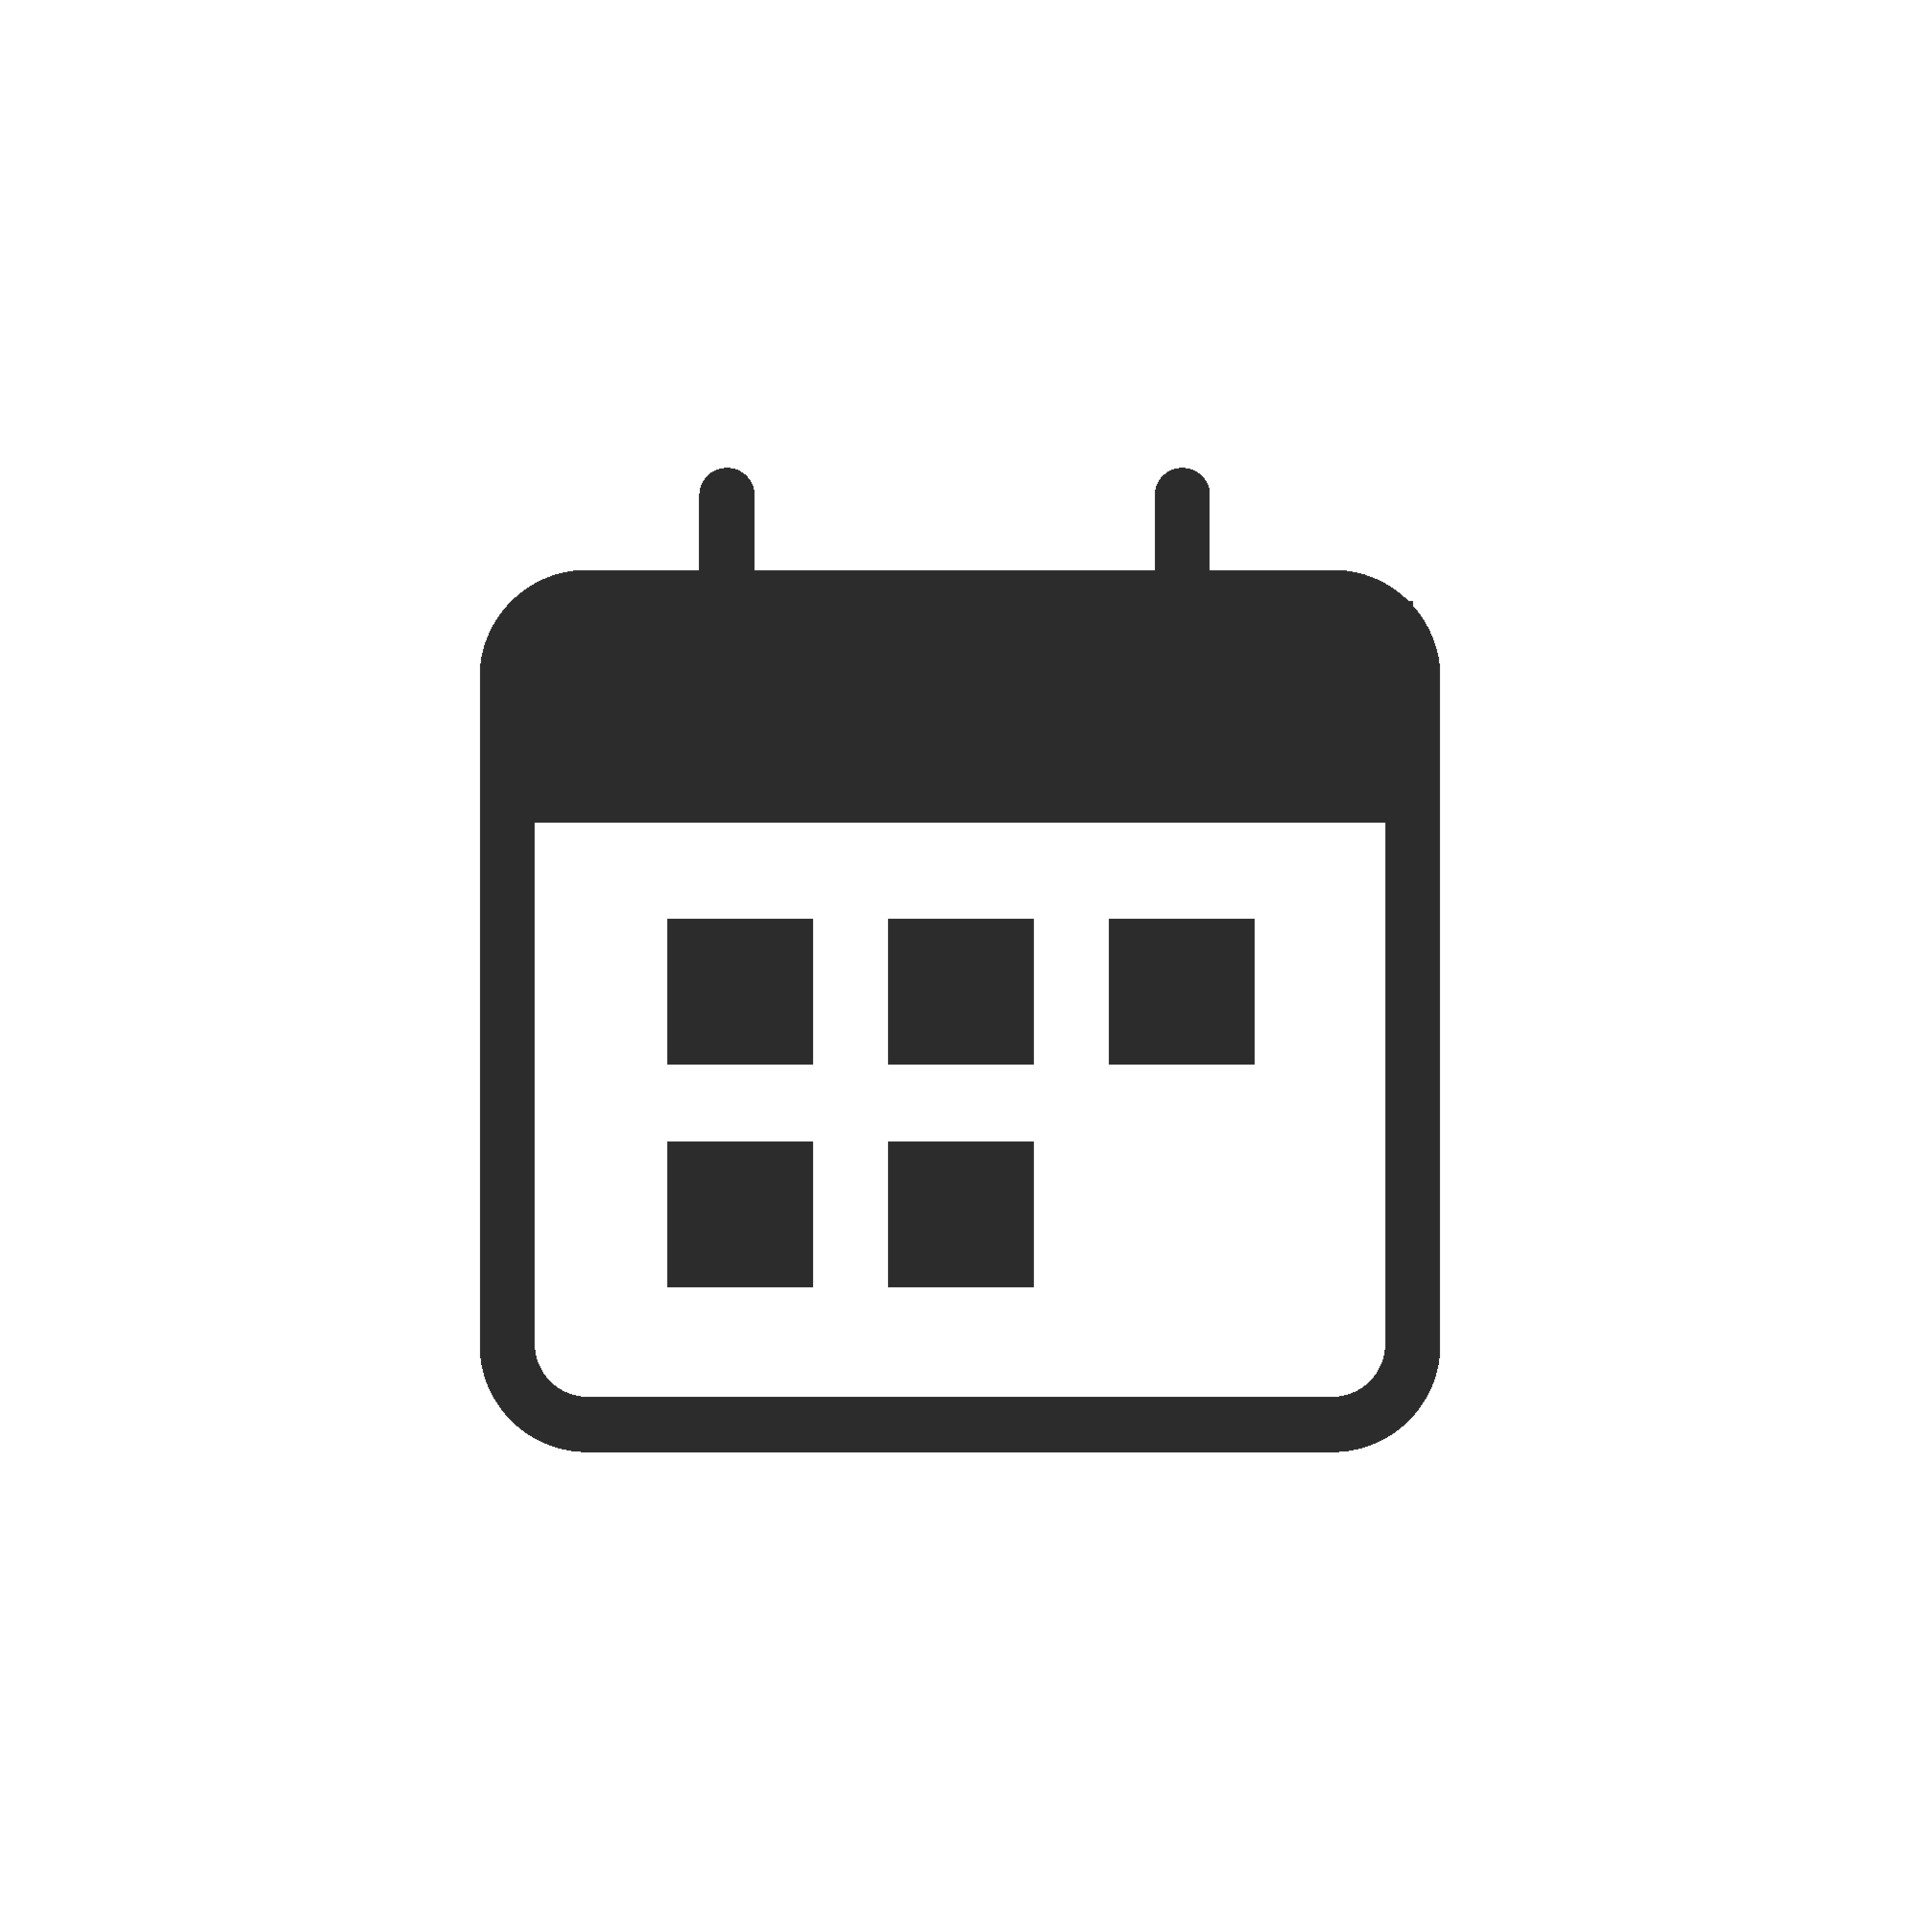 calendar-icon-flat-style-isolated-on-white-background-free-vector